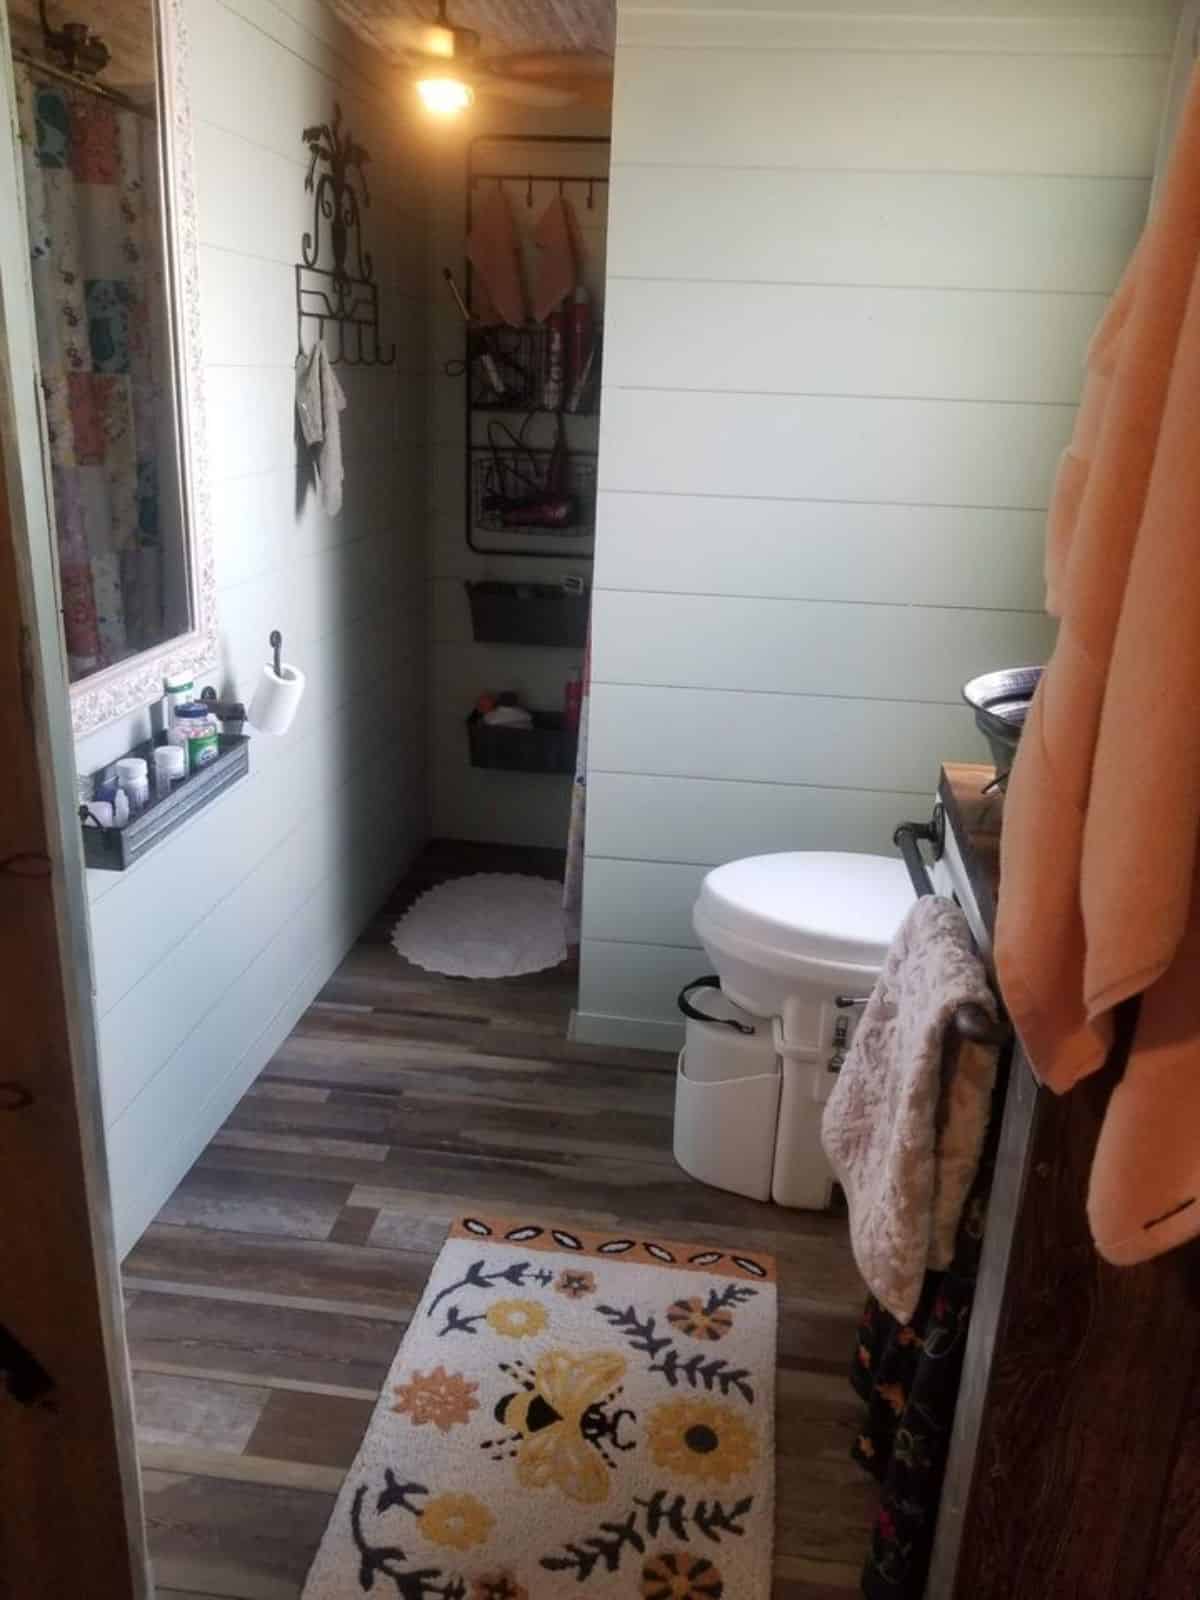 Mirror and other place to shower in bathroom